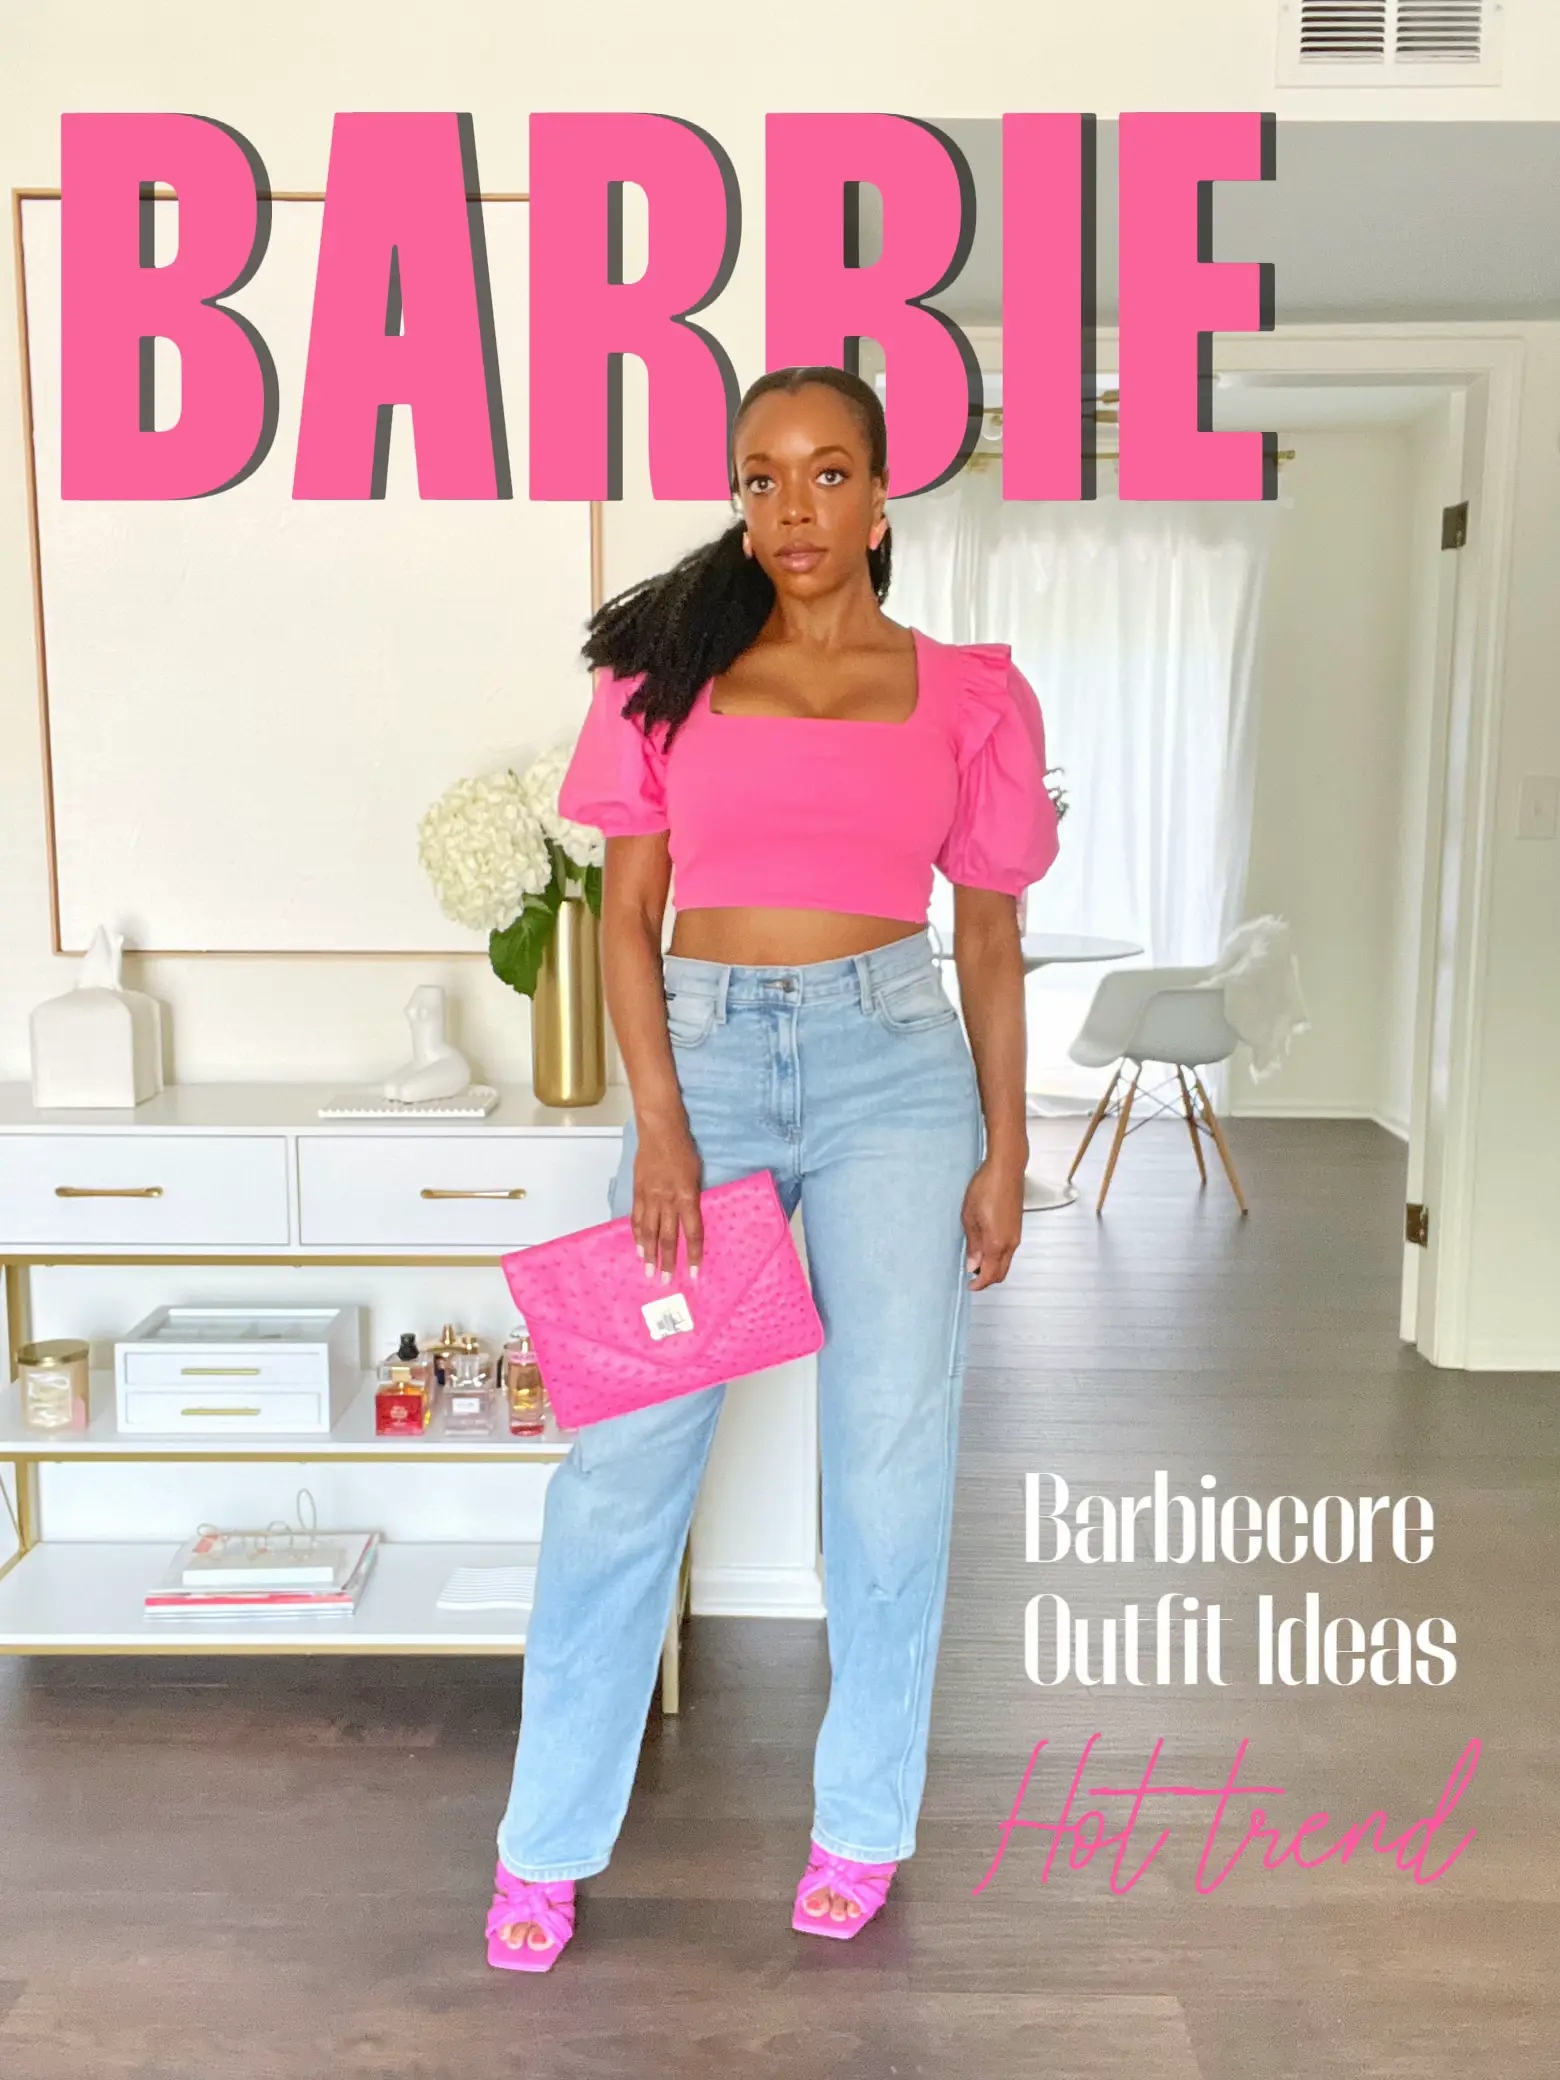 Barbiecore Ideas 👛, Gallery posted by GlamHerStyled